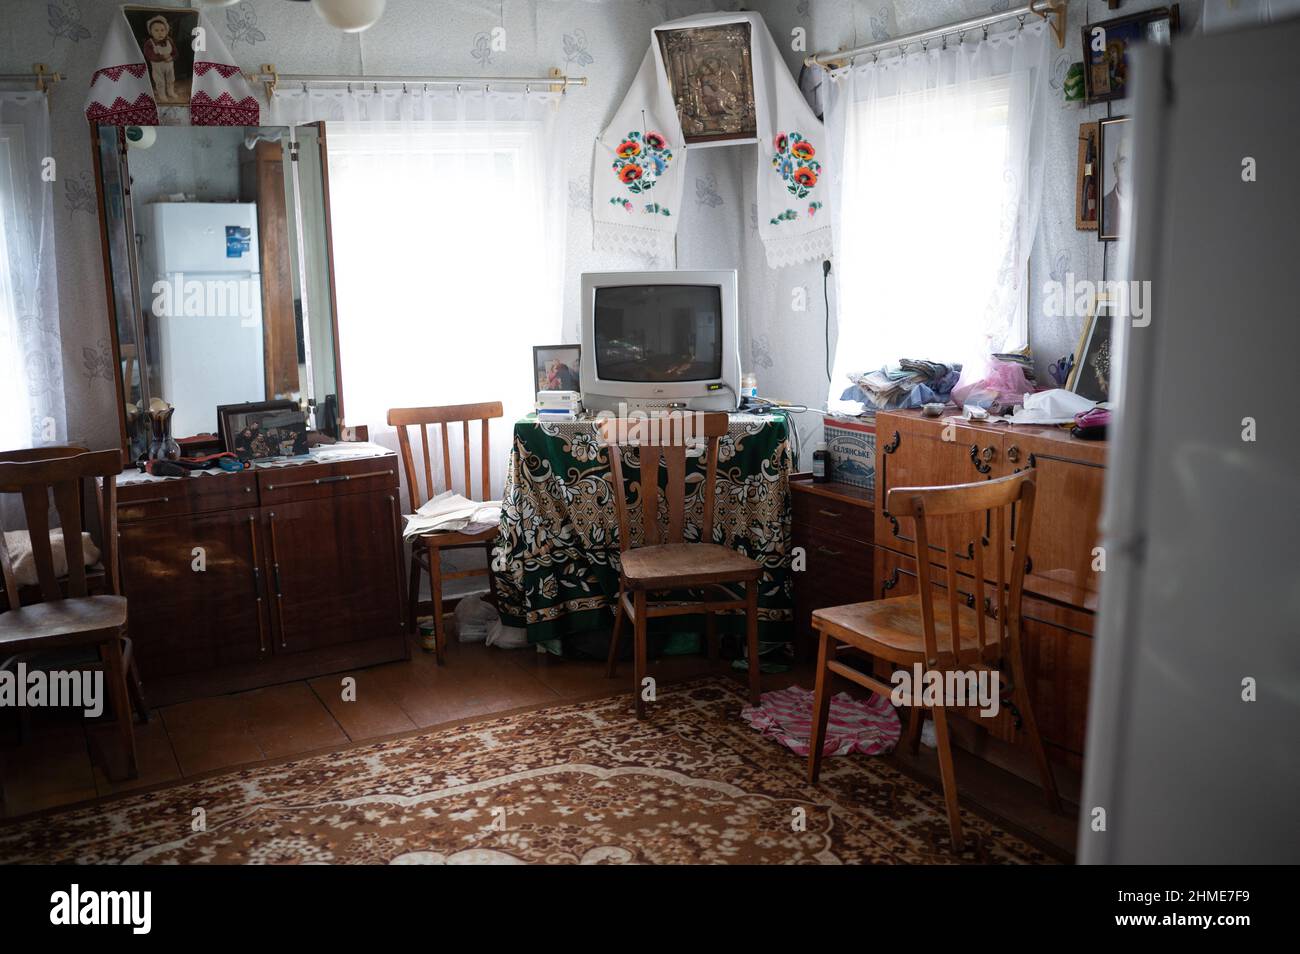 Inside the home of Baba Gania, one of the most famous Chernobyl resettlers, in Kupovate, Ukraine near the Chernobyl Nuclear Power Plant. Stock Photo